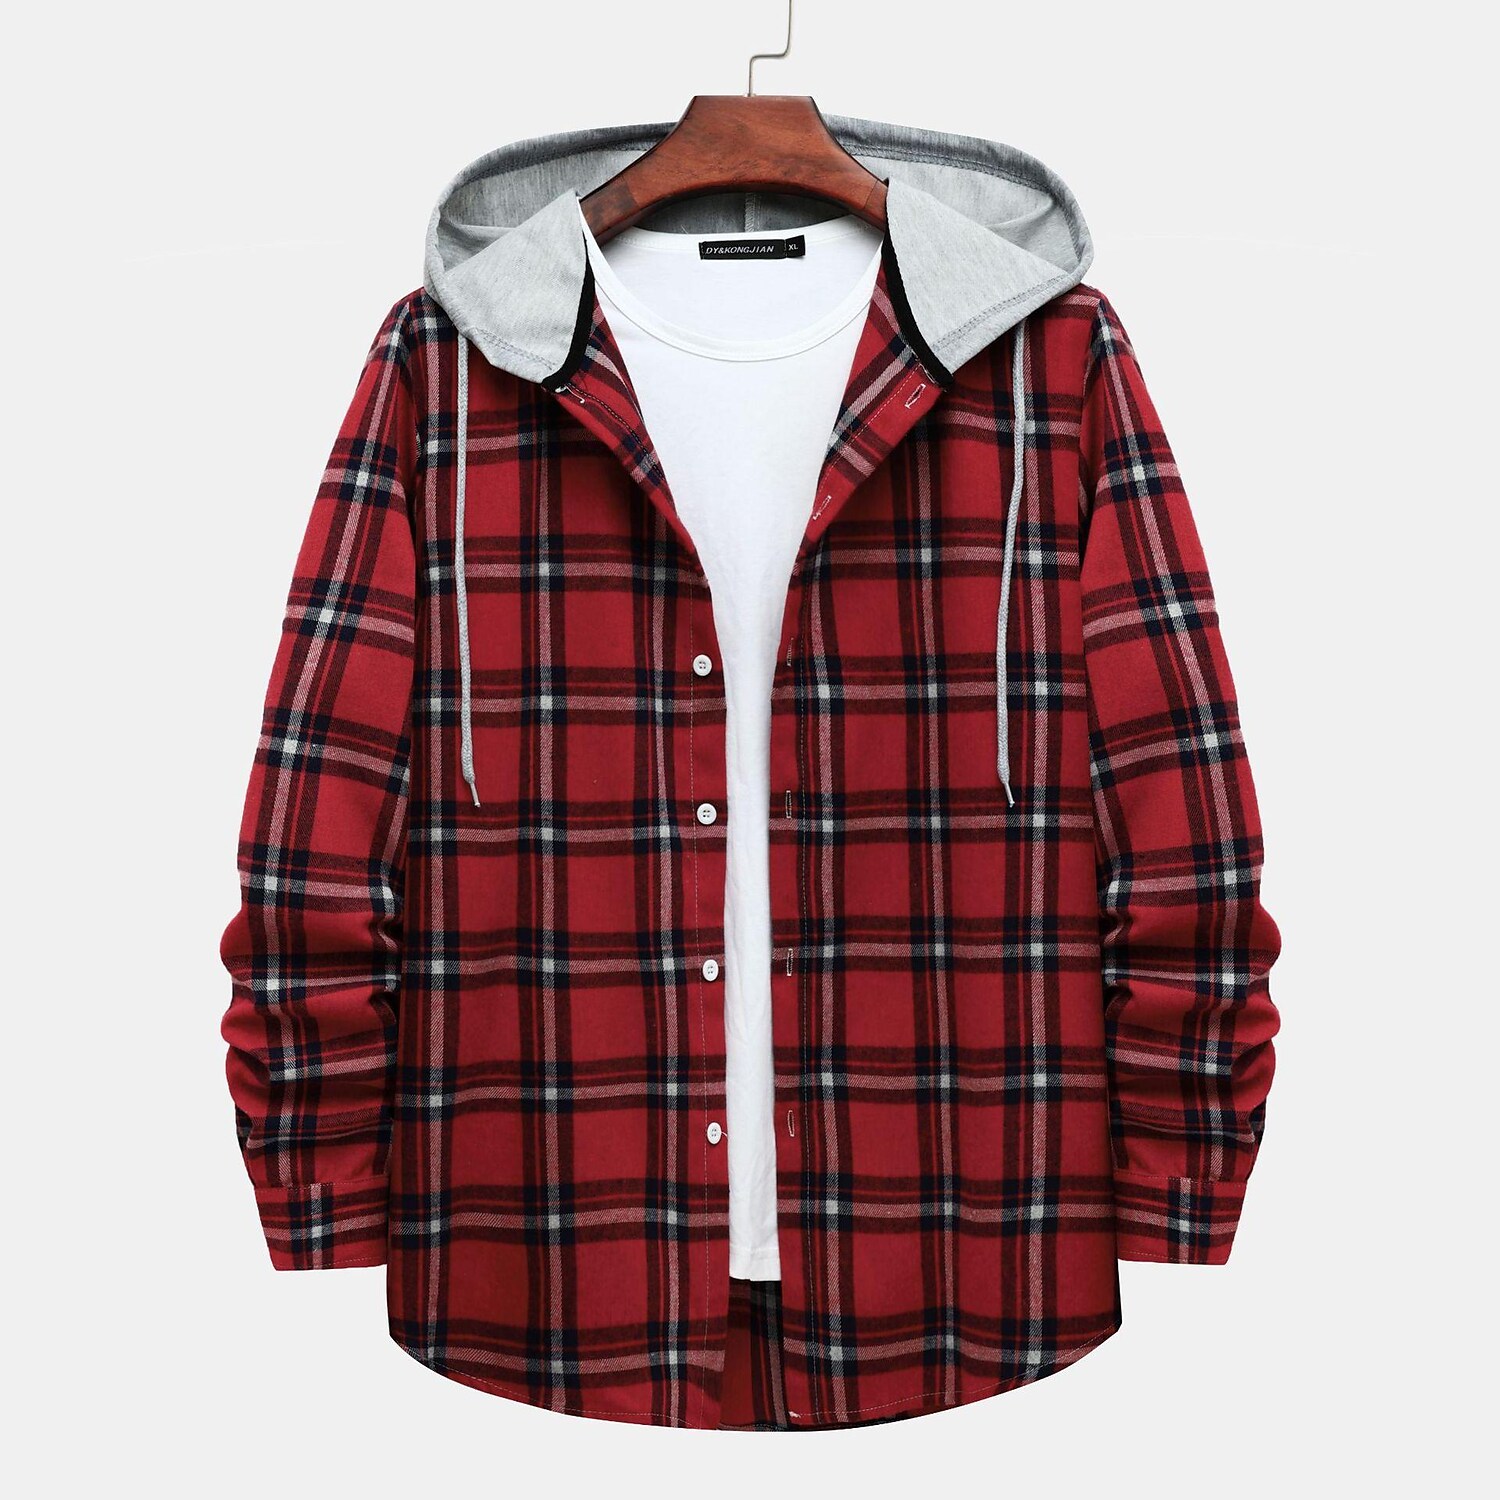 Poisonstreetwear Men's Long Sleeve Flannel Brushed Check Hooded Casual Shirt Red Blue-poisonstreetwear.com